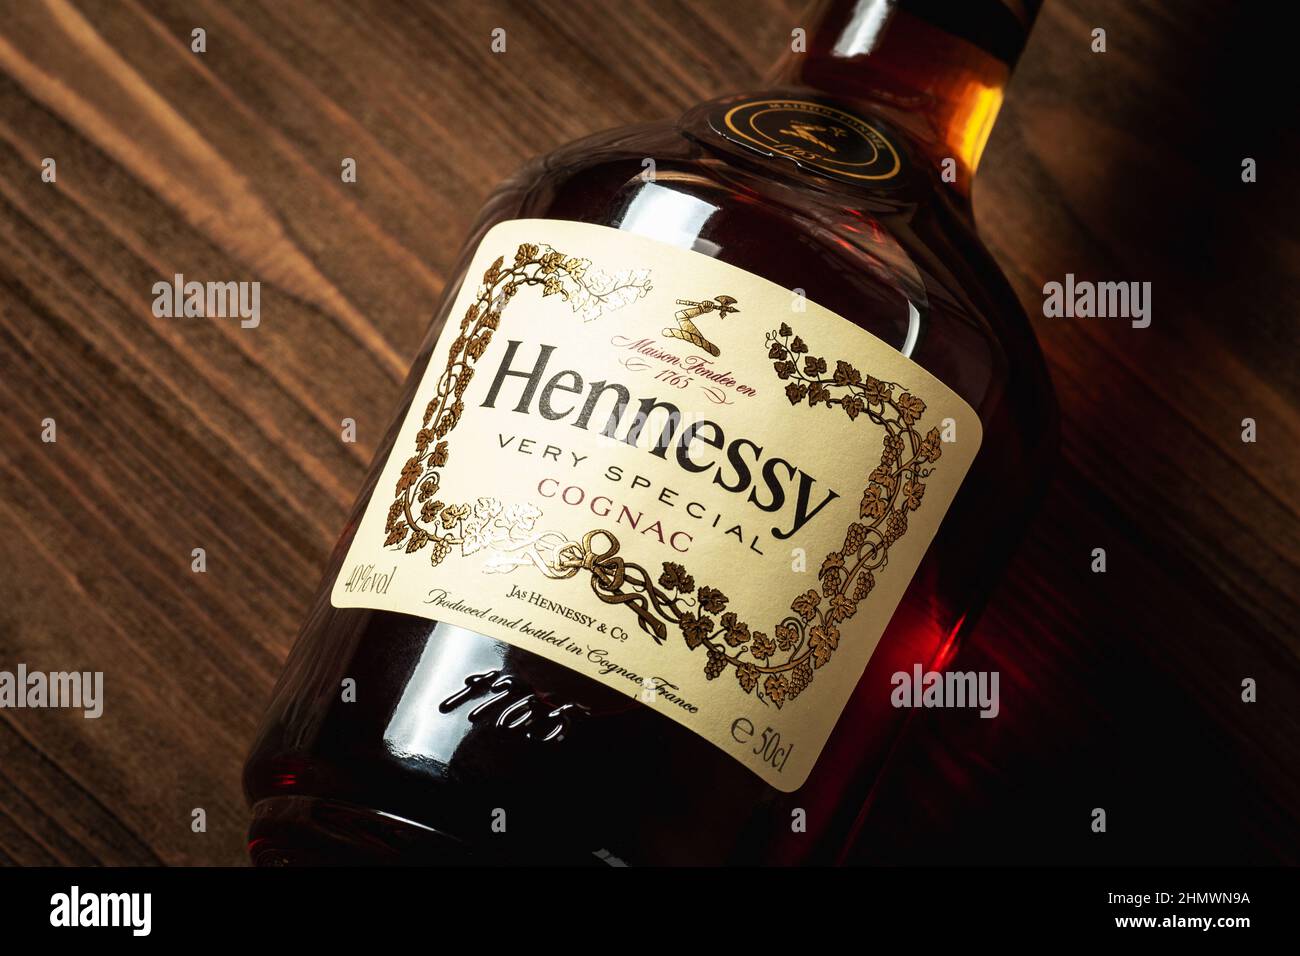 Ternopil, Ukraine - April 29, 2021: A bottle of Hennessy very special cognac on a wooden table. Close up cognac bottle Stock Photo